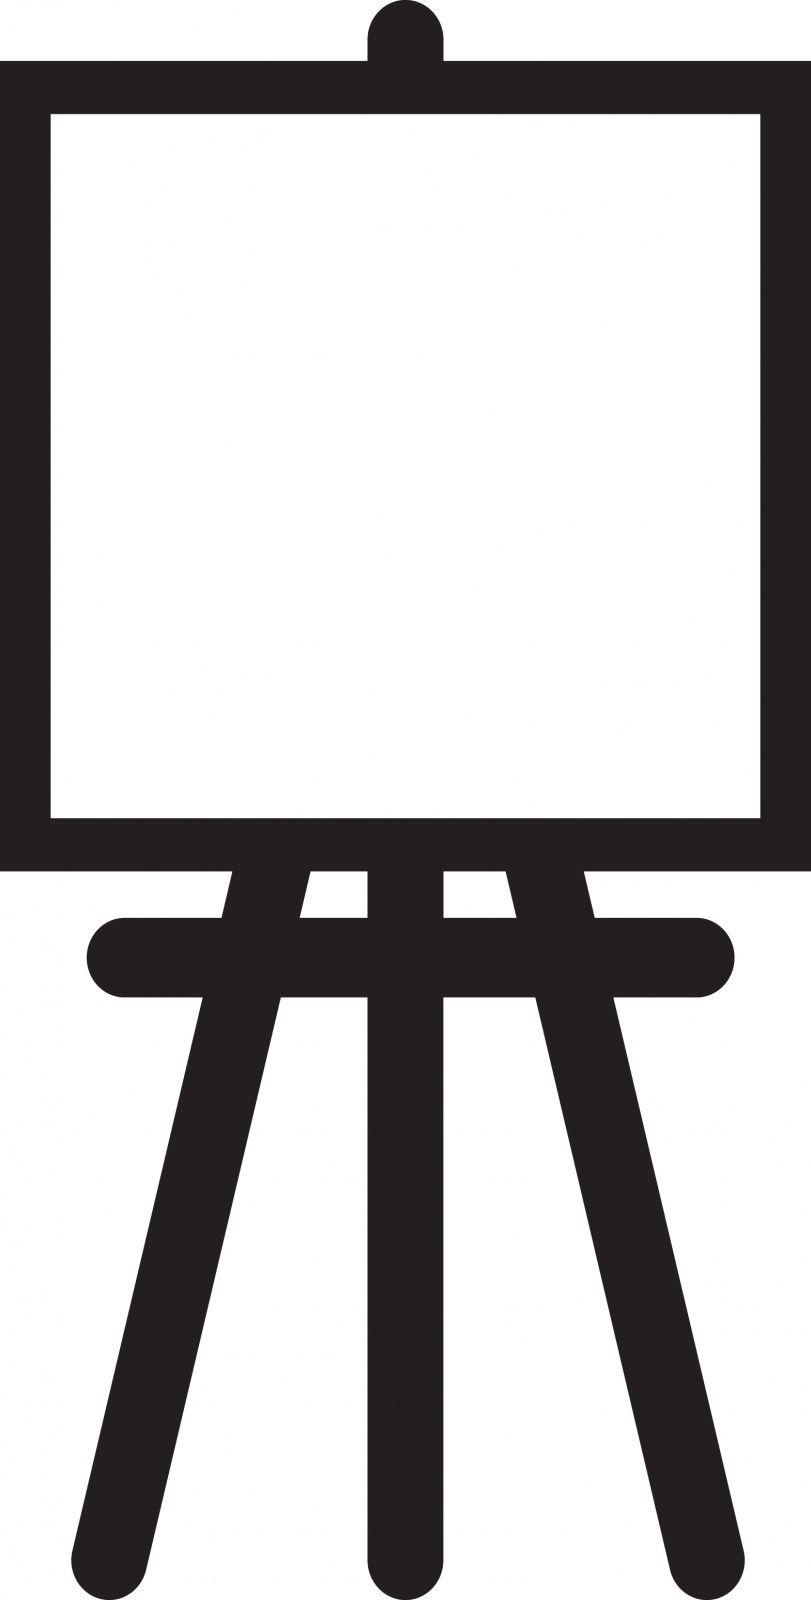 Painting Black and White Logo - Free Easel Clipart, Download Free Clip Art, Free Clip Art